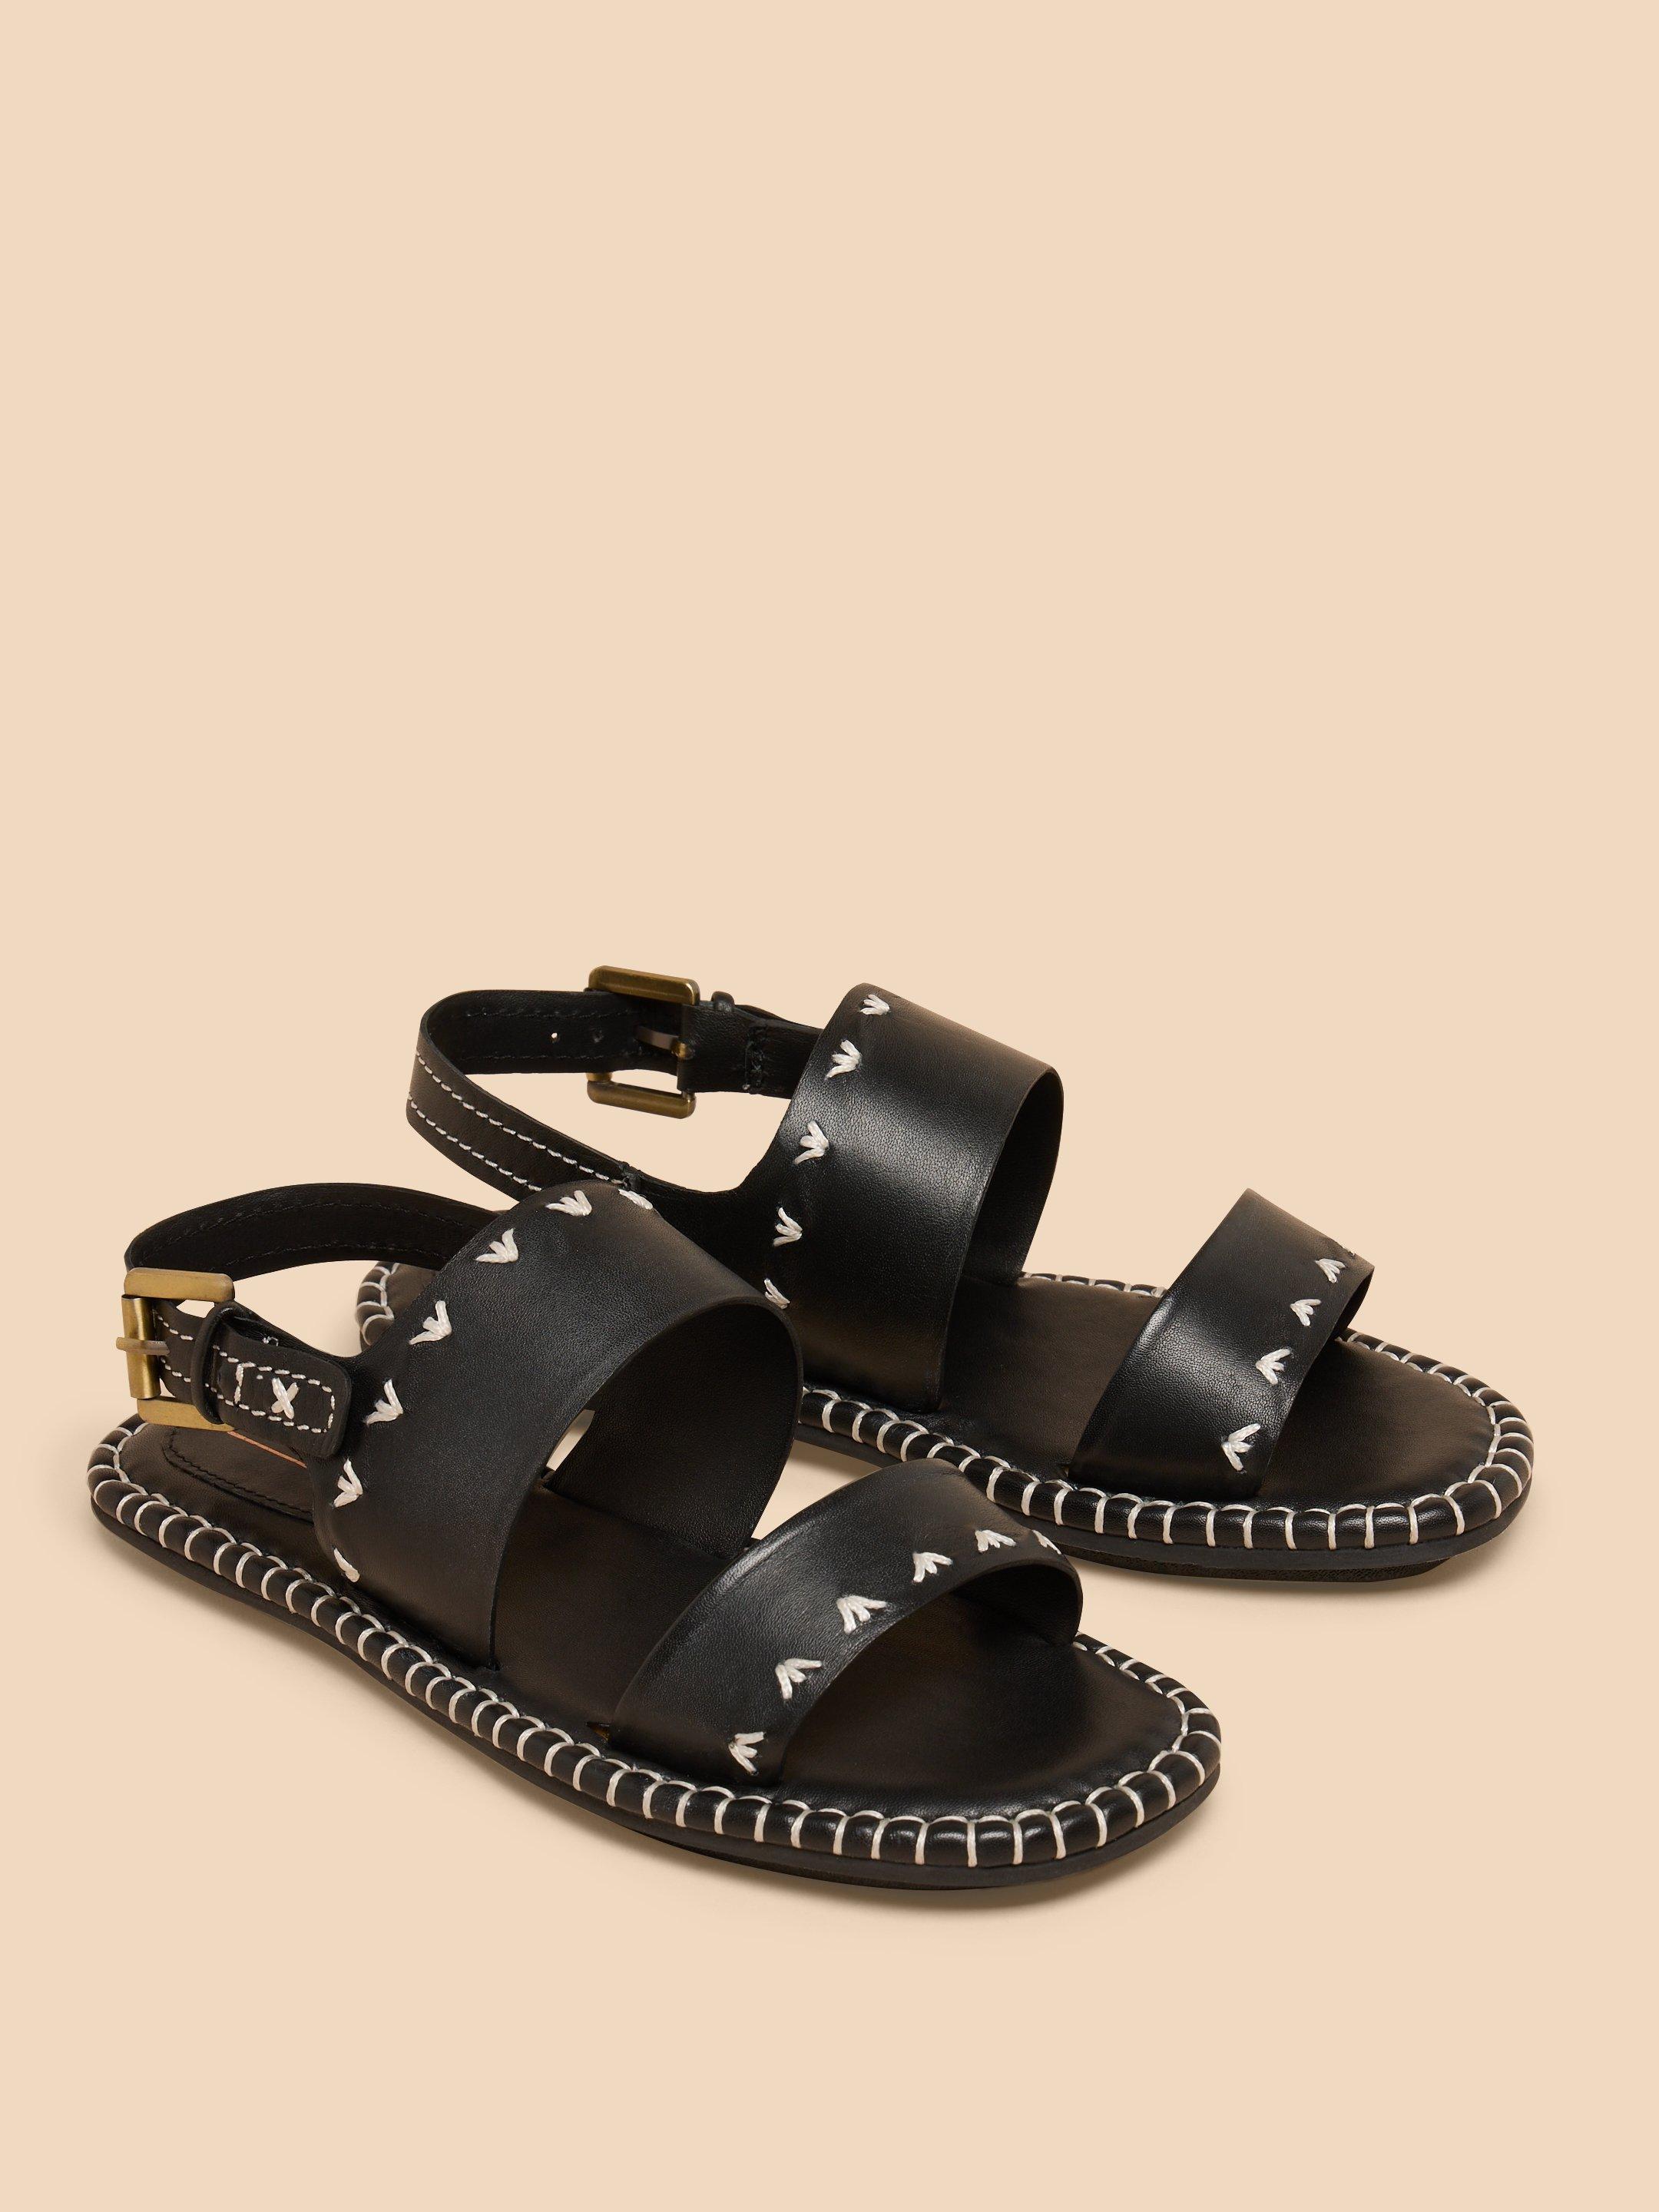 Sweetpea Leather Sandal in PURE BLK - FLAT FRONT